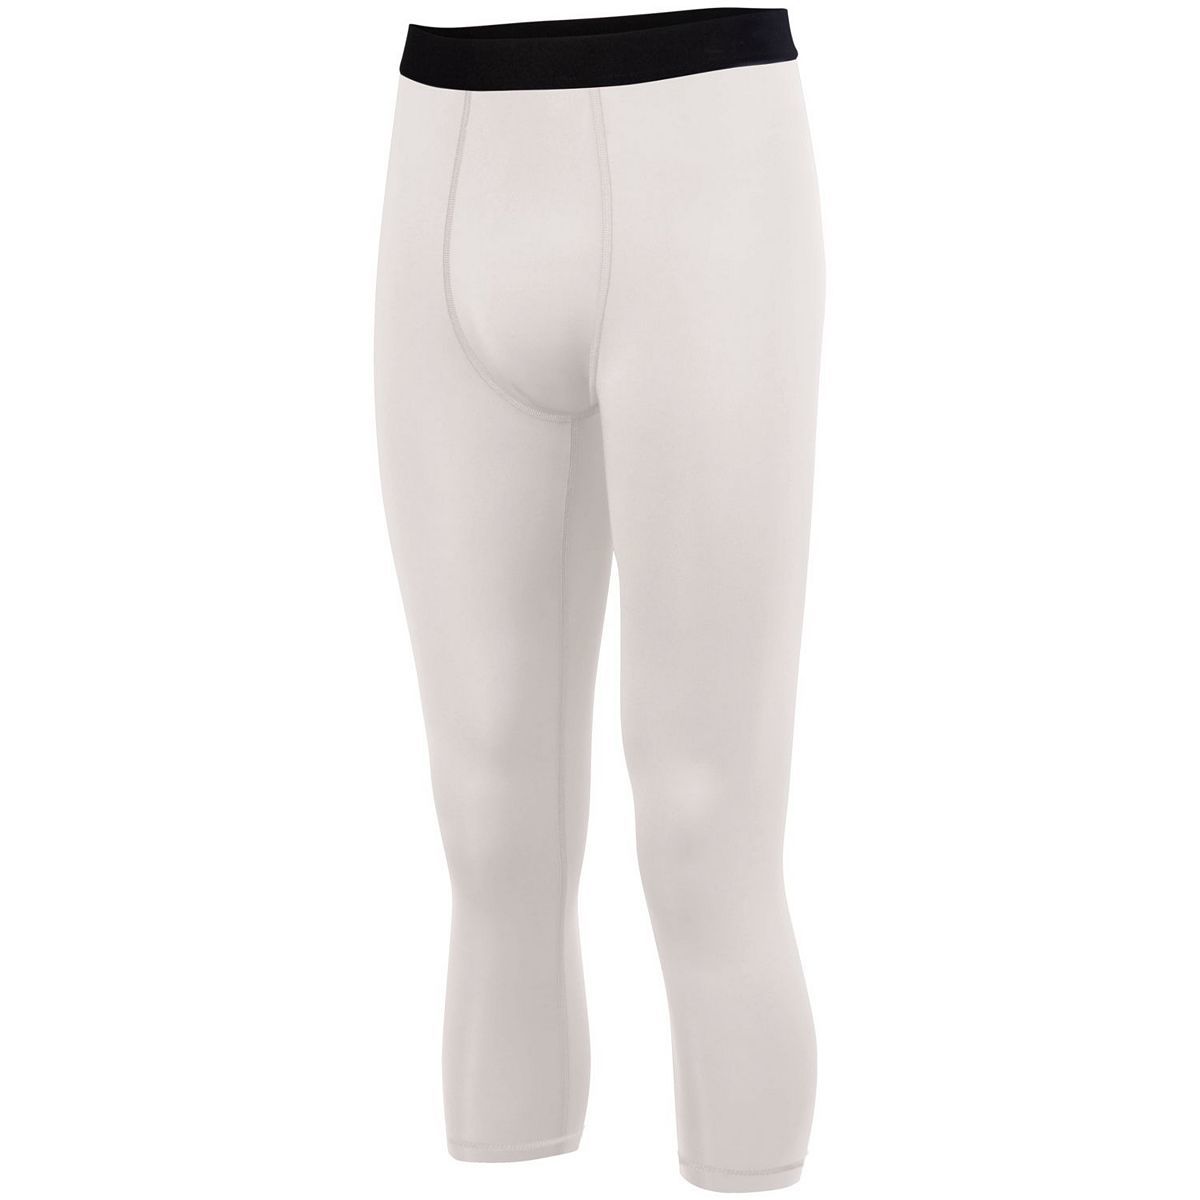 Youth Hyperform Compression Calf-Length Tight 2619